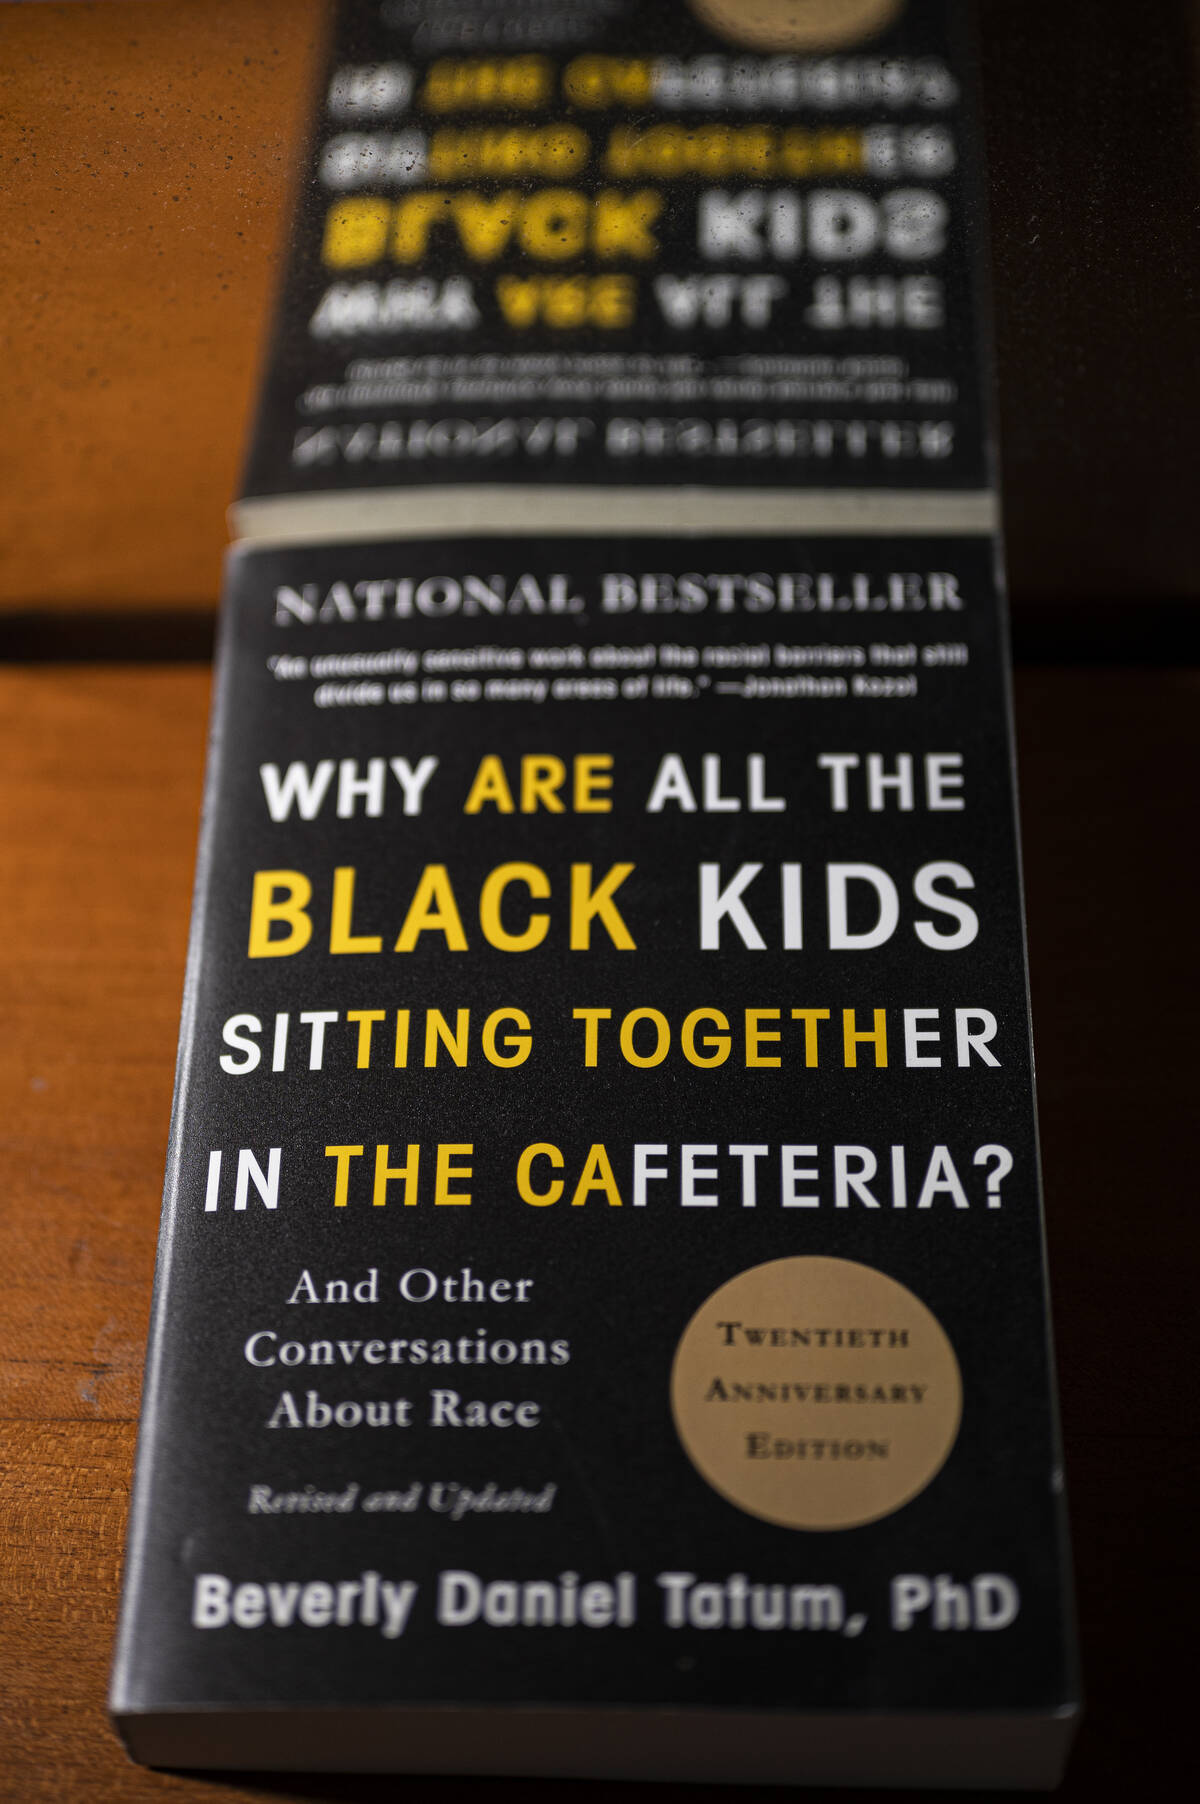 A copy of the book “Why Are All the Black Kids Sitting Together in the Cafeteria” by Sharon Creech.